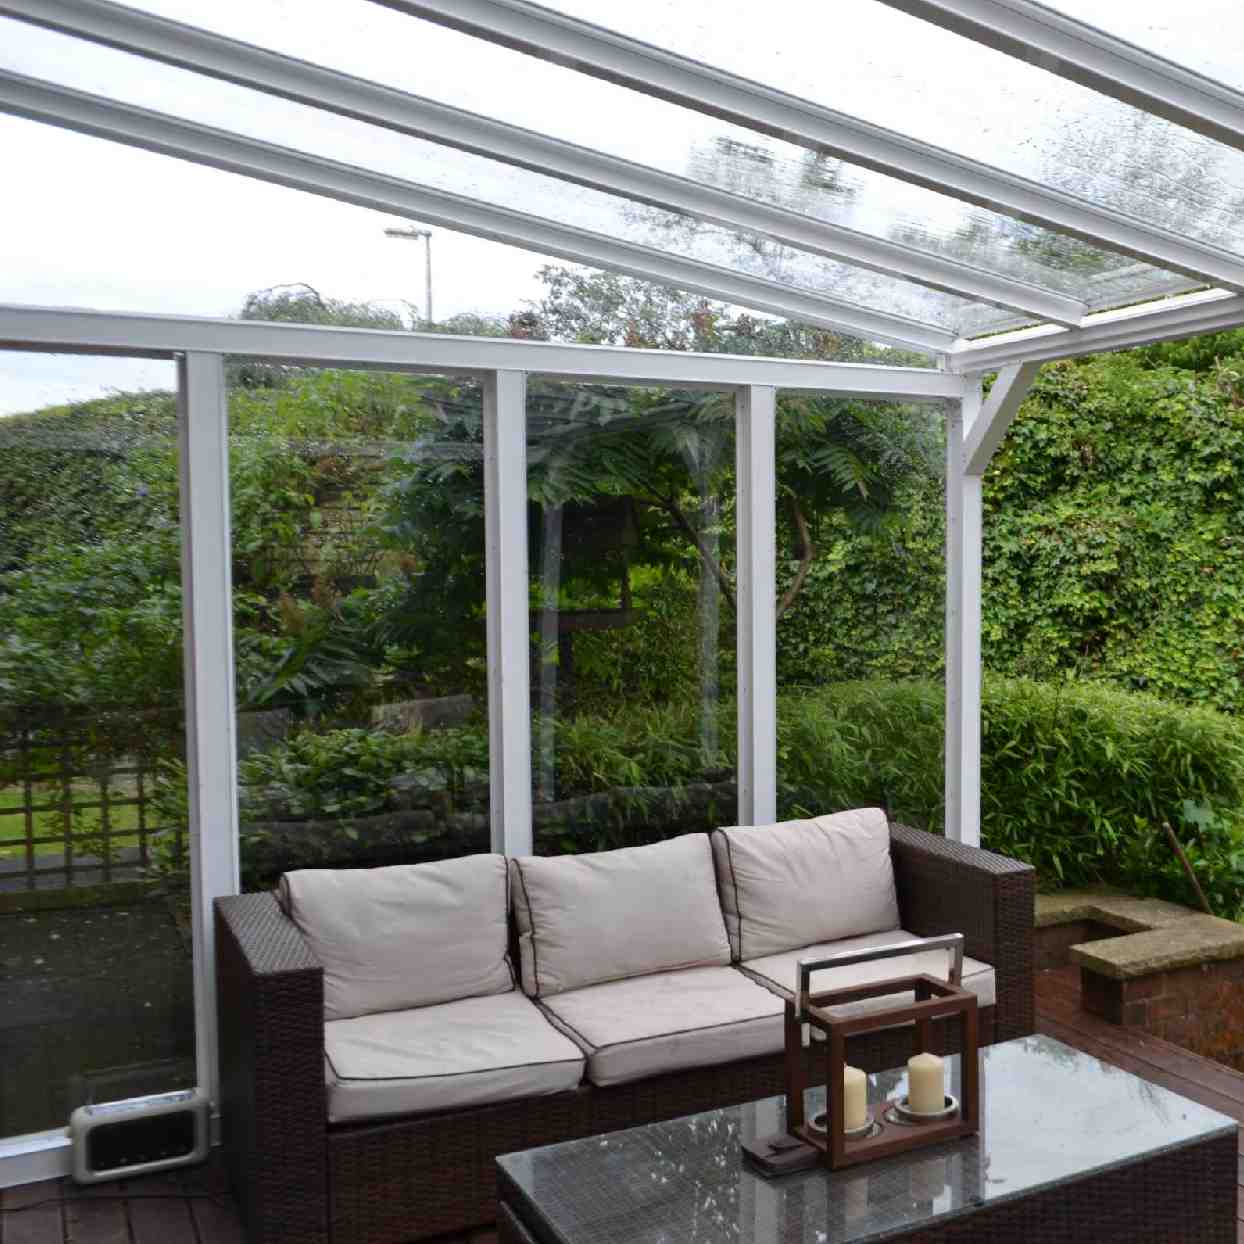 Buy Omega Verandah White with 6mm Glass Clear Plate Polycarbonate Glazing - 2.8m (W) x 2.0m (P), (2) Supporting Posts online today